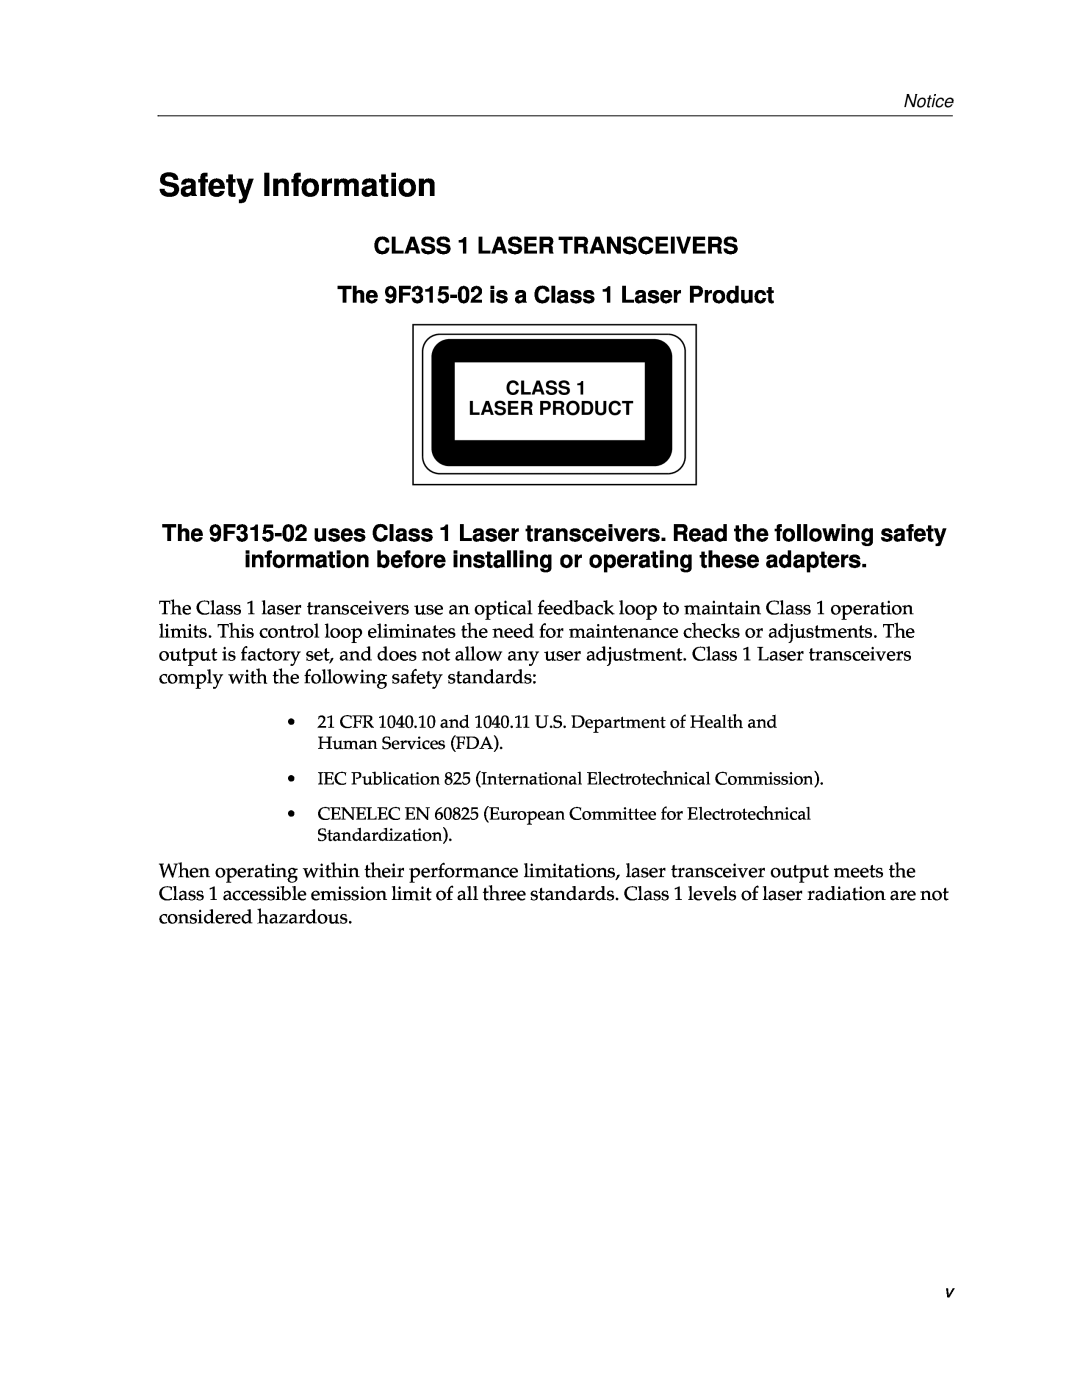 Cabletron Systems 9F310-02 manual Safety Information, CLASS 1 LASER TRANSCEIVERS The 9F315-02 is a Class 1 Laser Product 